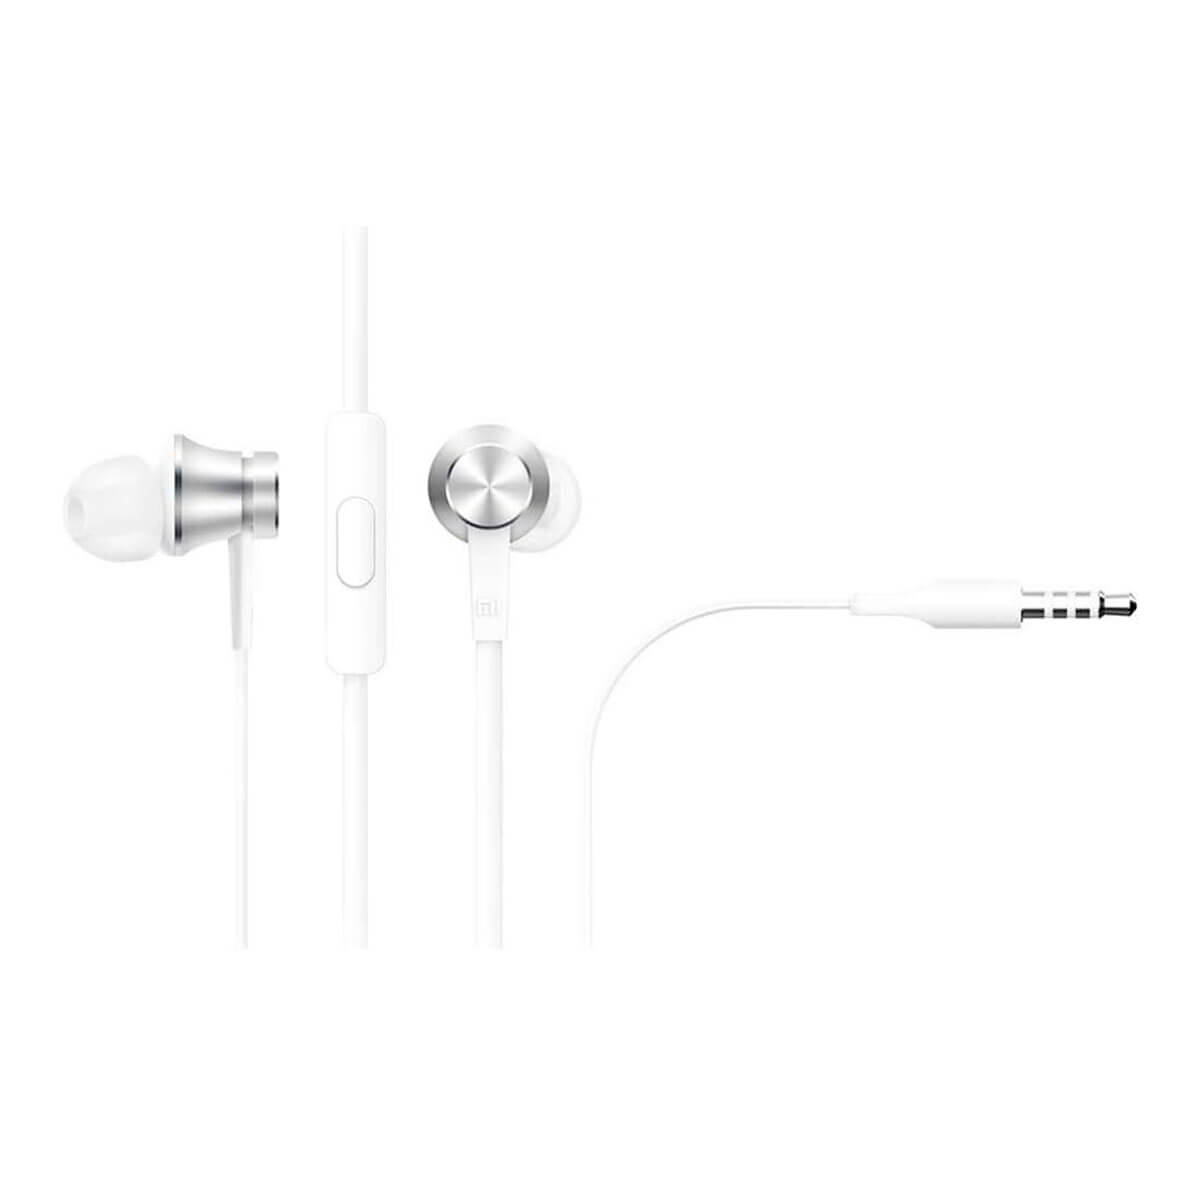 XIAOMI MI IN-EAR HEADPHONES BASIC AURICULARES CON CABLE PLATA (SILVER) ZBW4355TY